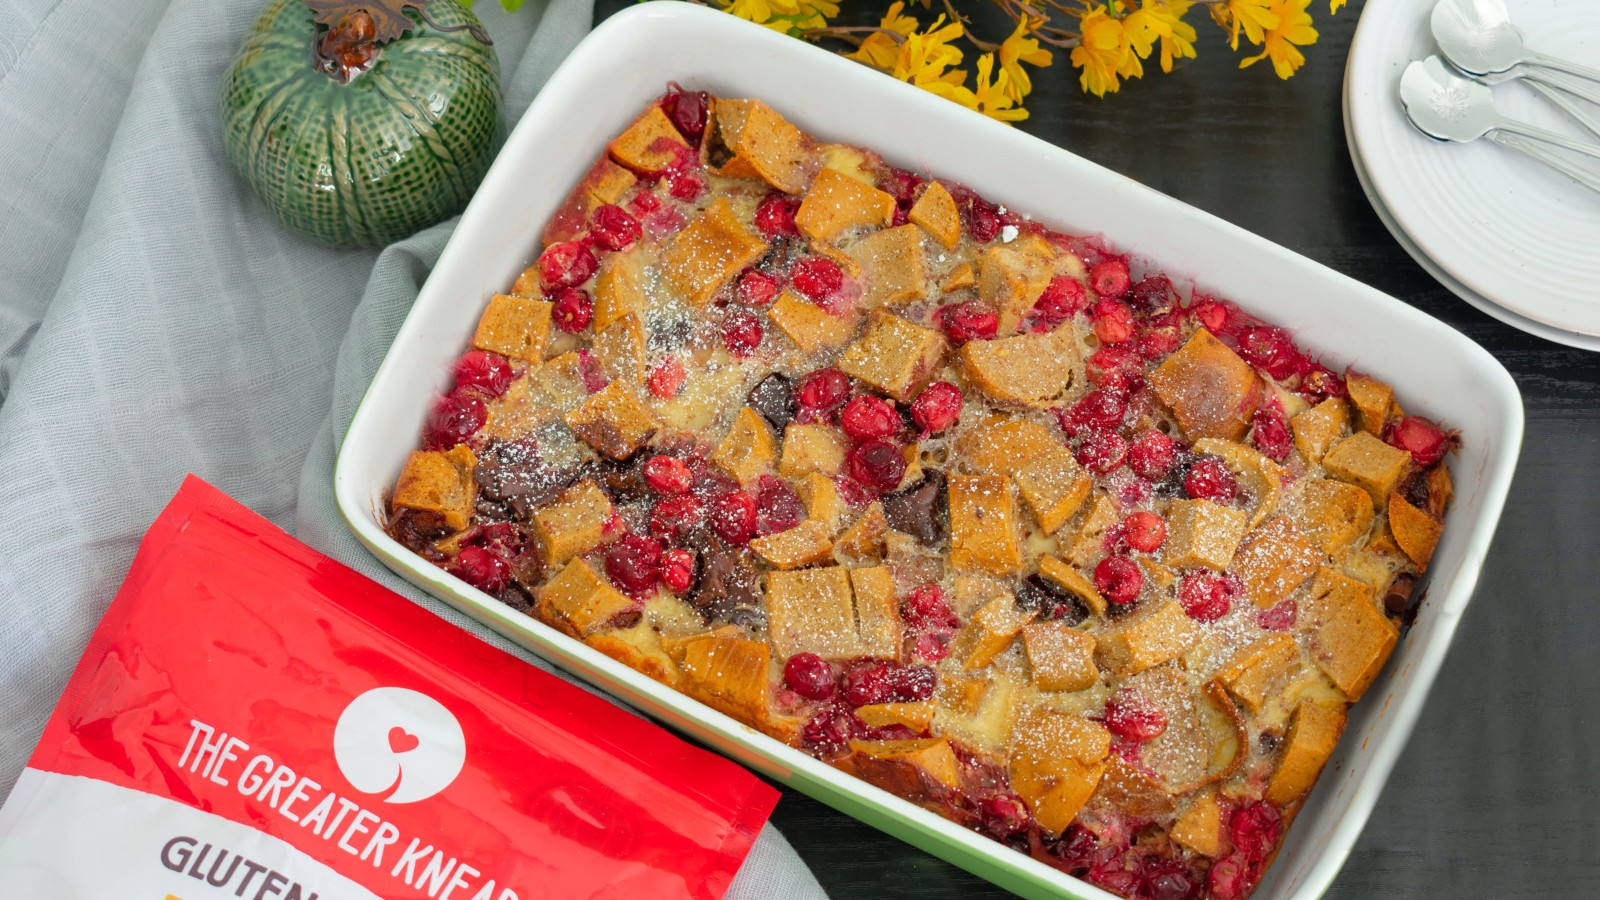 Image of Gluten Free French Toast Casserole With Chocolate Cranberries